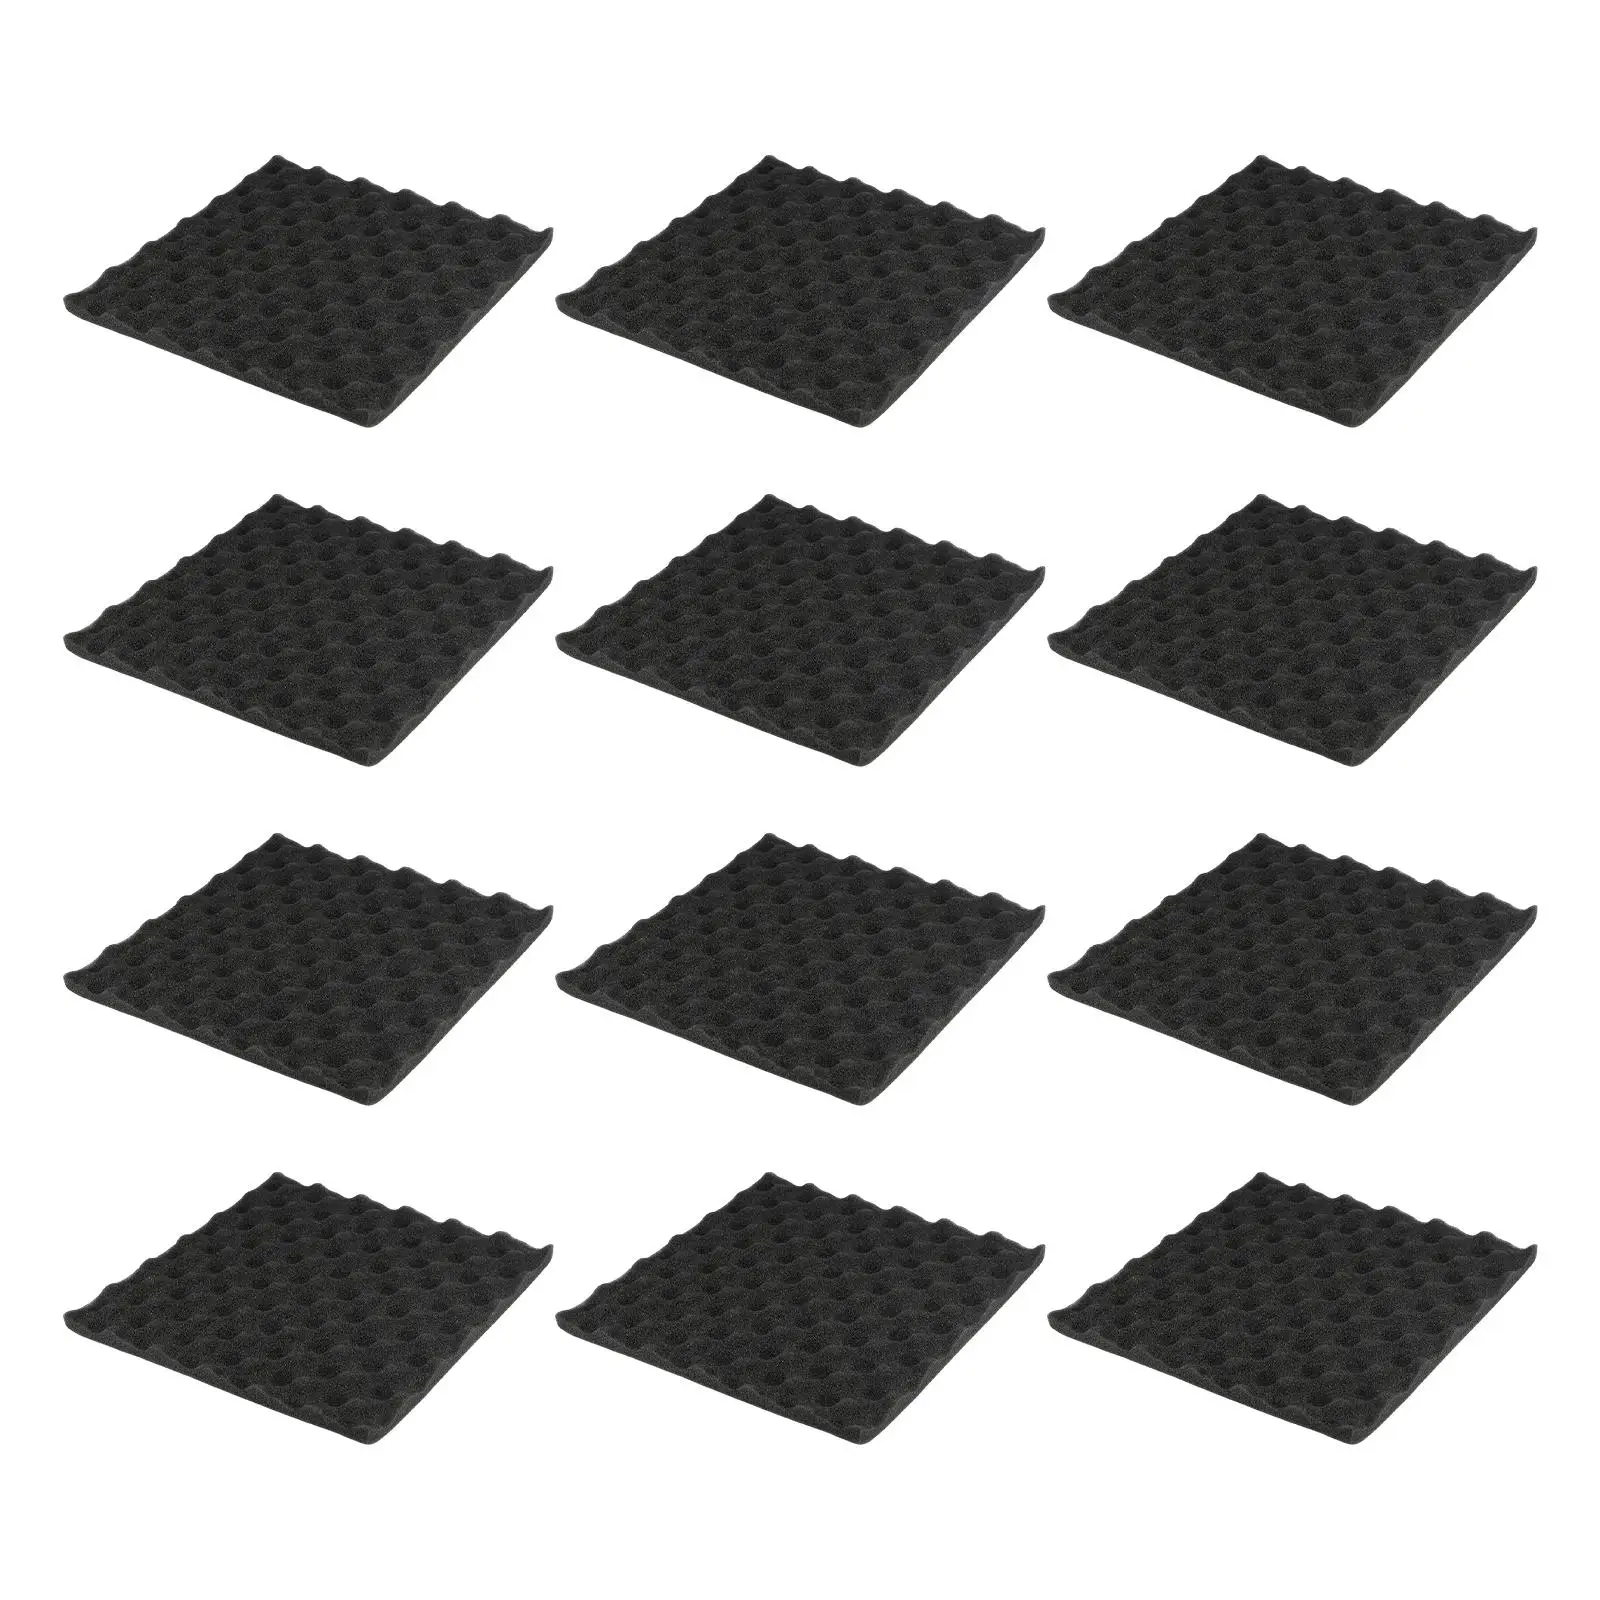 12x Soundproof Sound Background Foam Acoustic Foam for Home Office